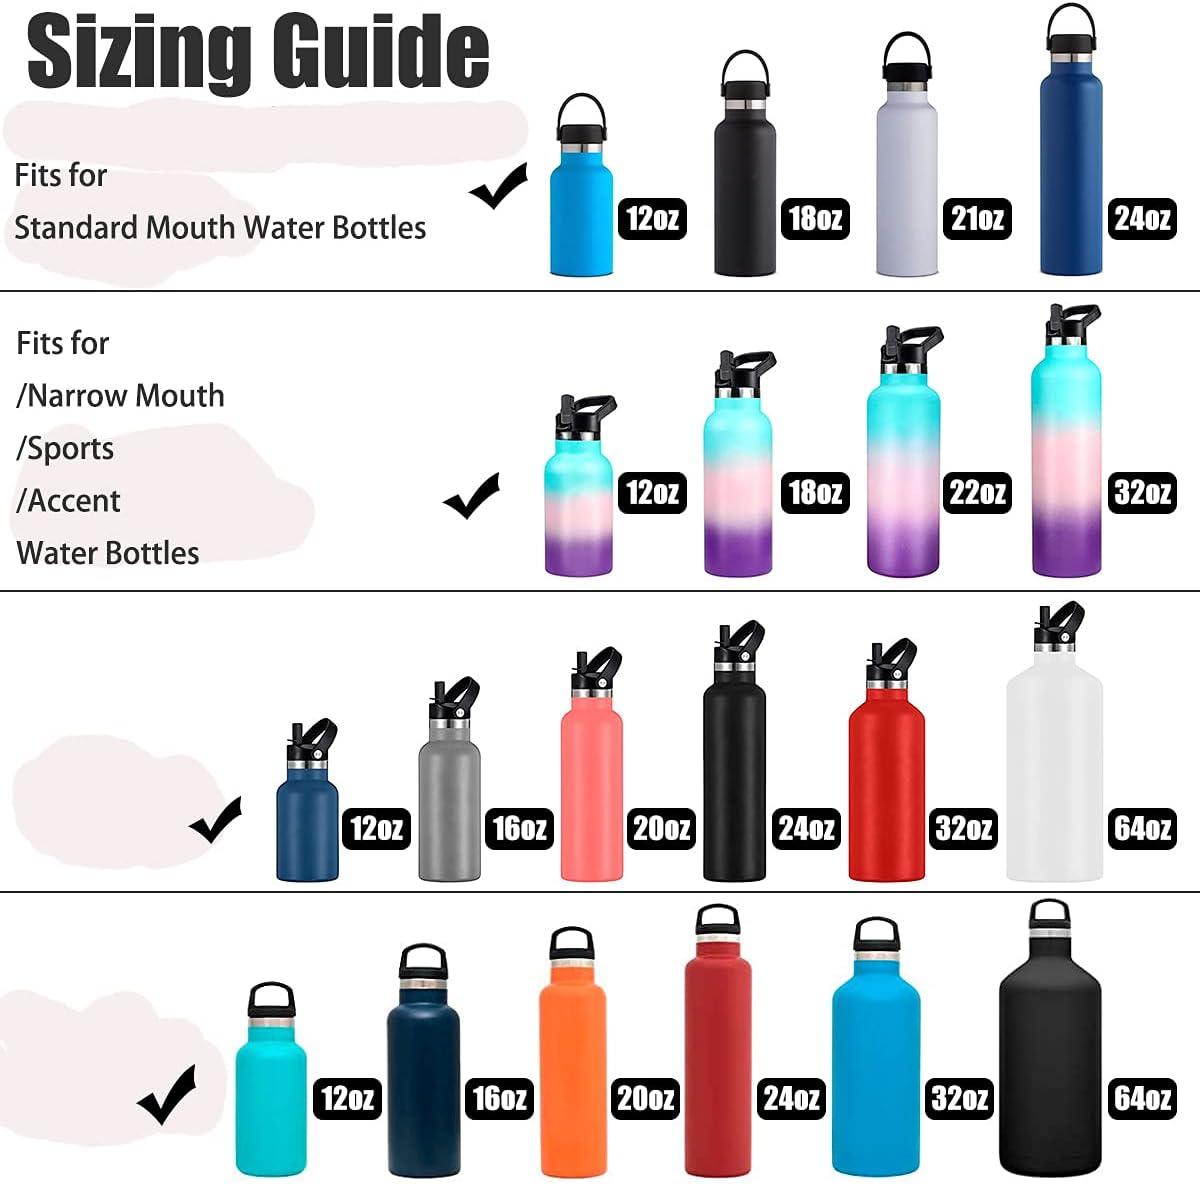 Straw Lid Replacement for Hydro Flask Standard Mouth & Simple Modern Ascent  12-64oz Bottles. New and Improved Design Sipping Cap with Straws, Brush for  18, 21, 24oz Hydroflask. 